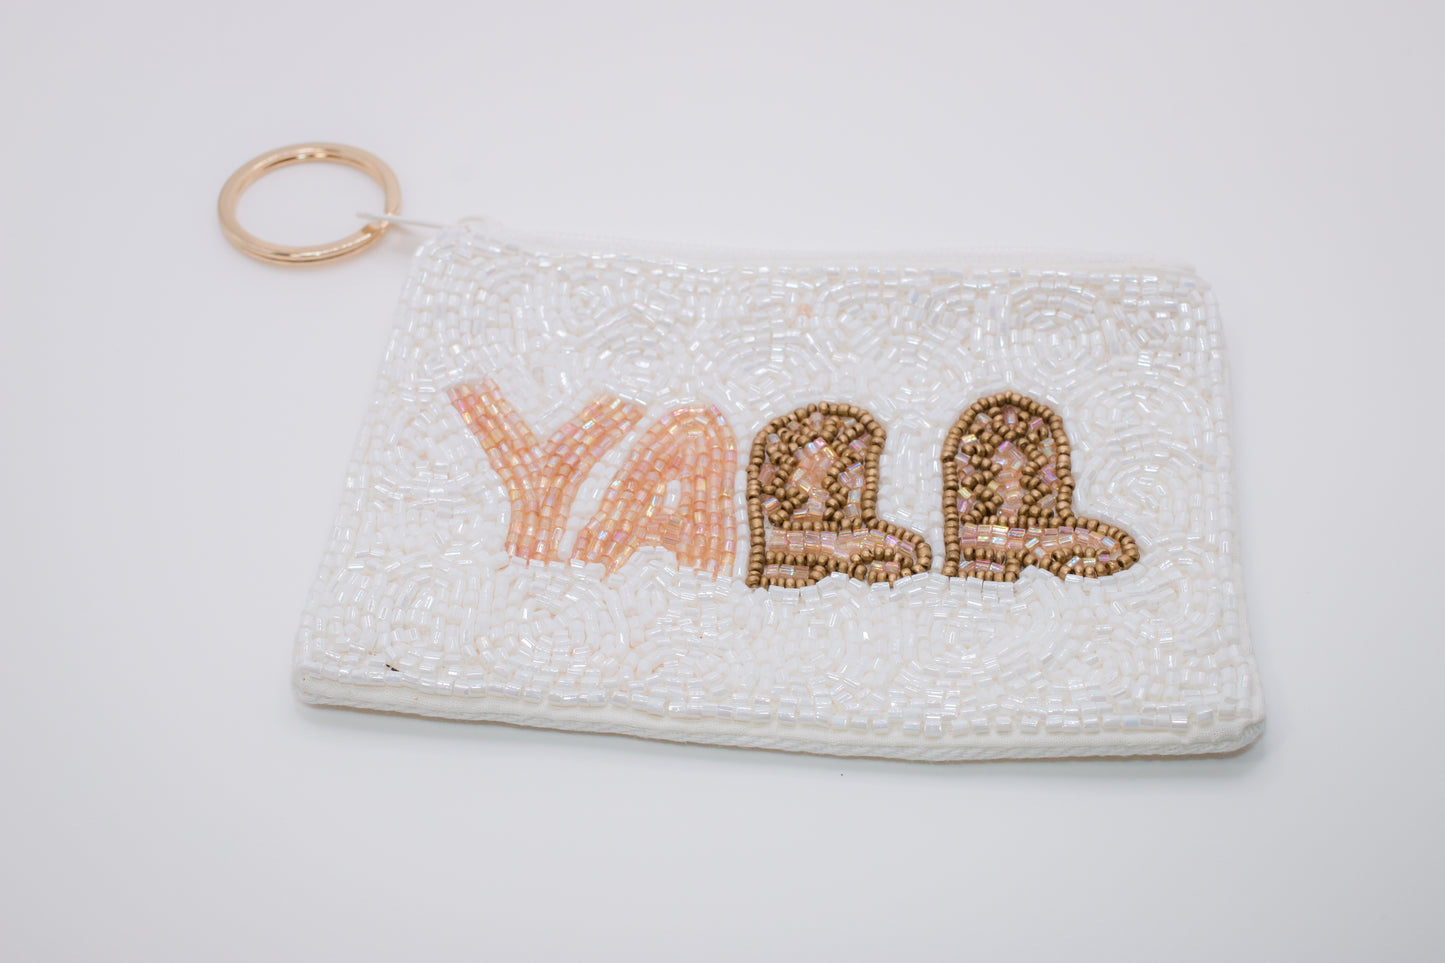 Beaded Keychain Wallets | Style Options